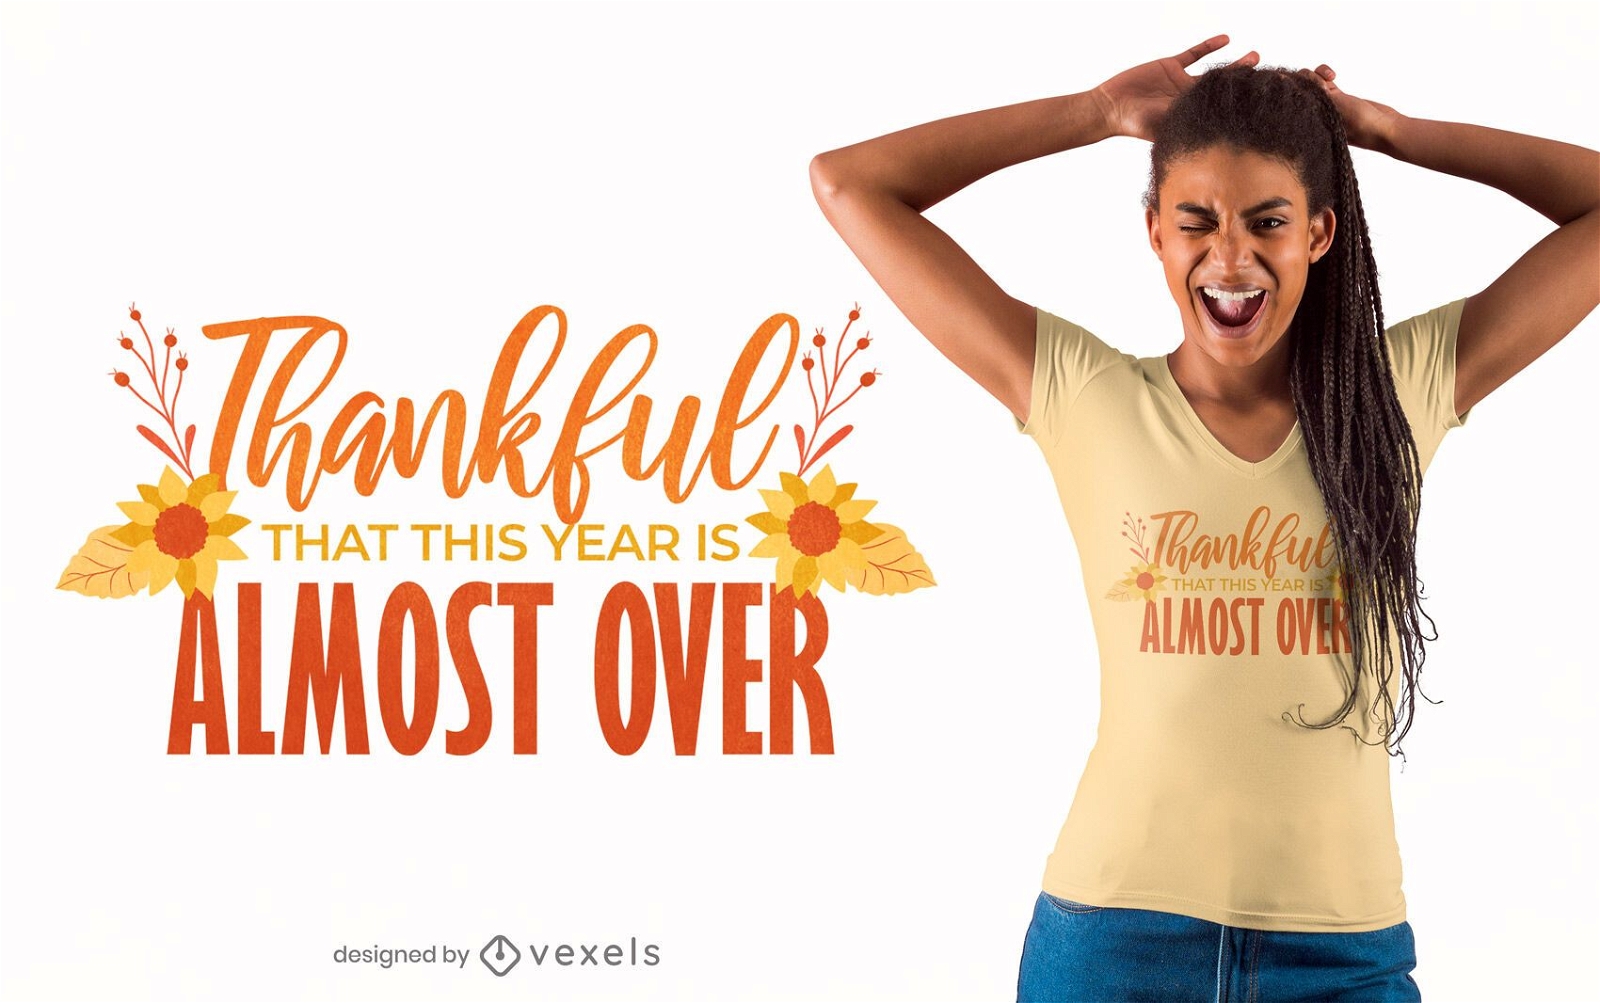 Funny thanksgiving quote t-shirt design